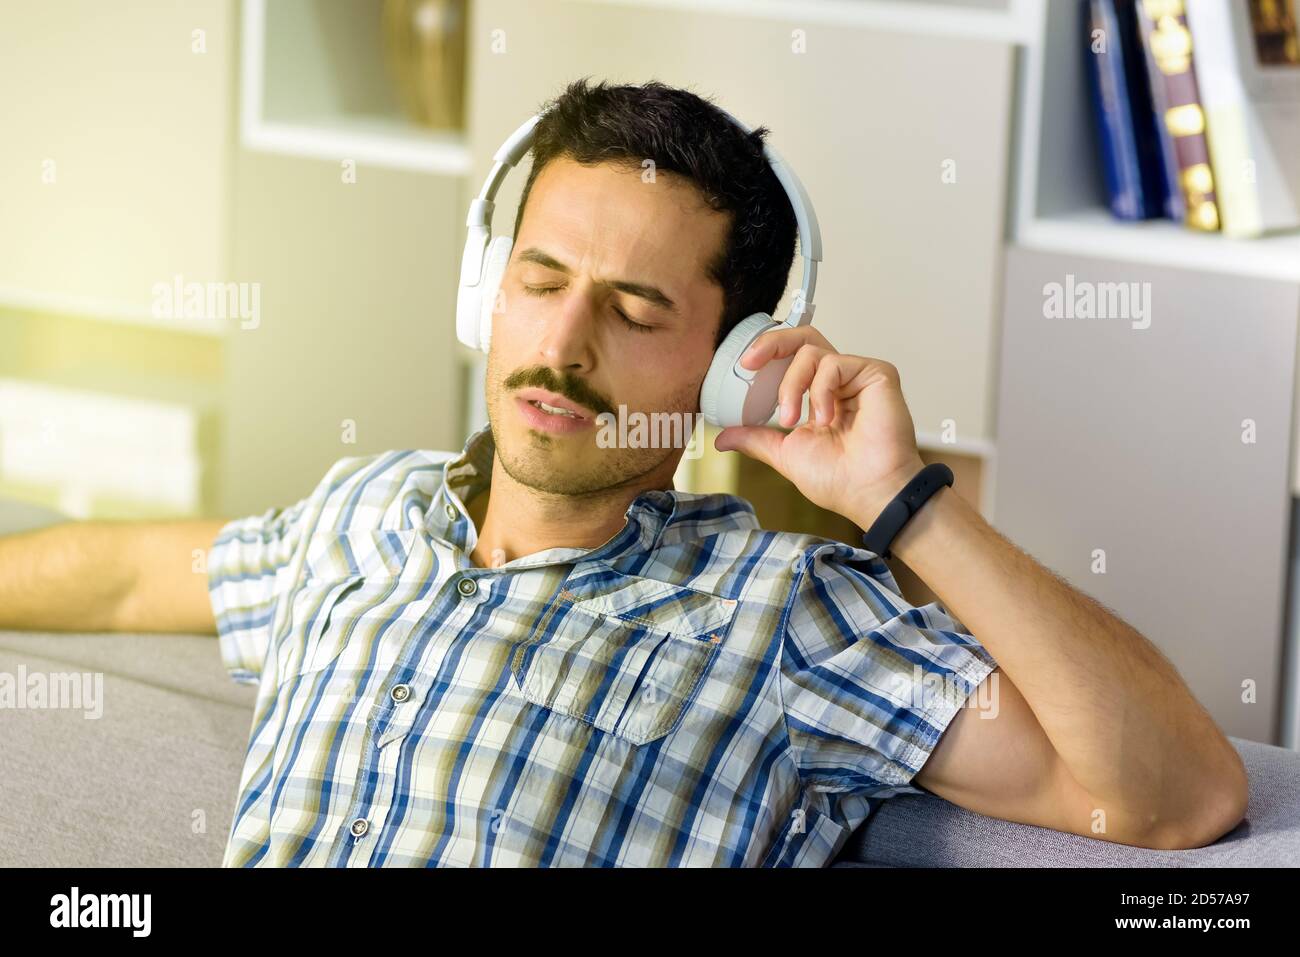 Blissful young man listening to music on stereo headphones as he relaxes on a sofa at home with eyes close immersed in the soundtrack Stock Photo